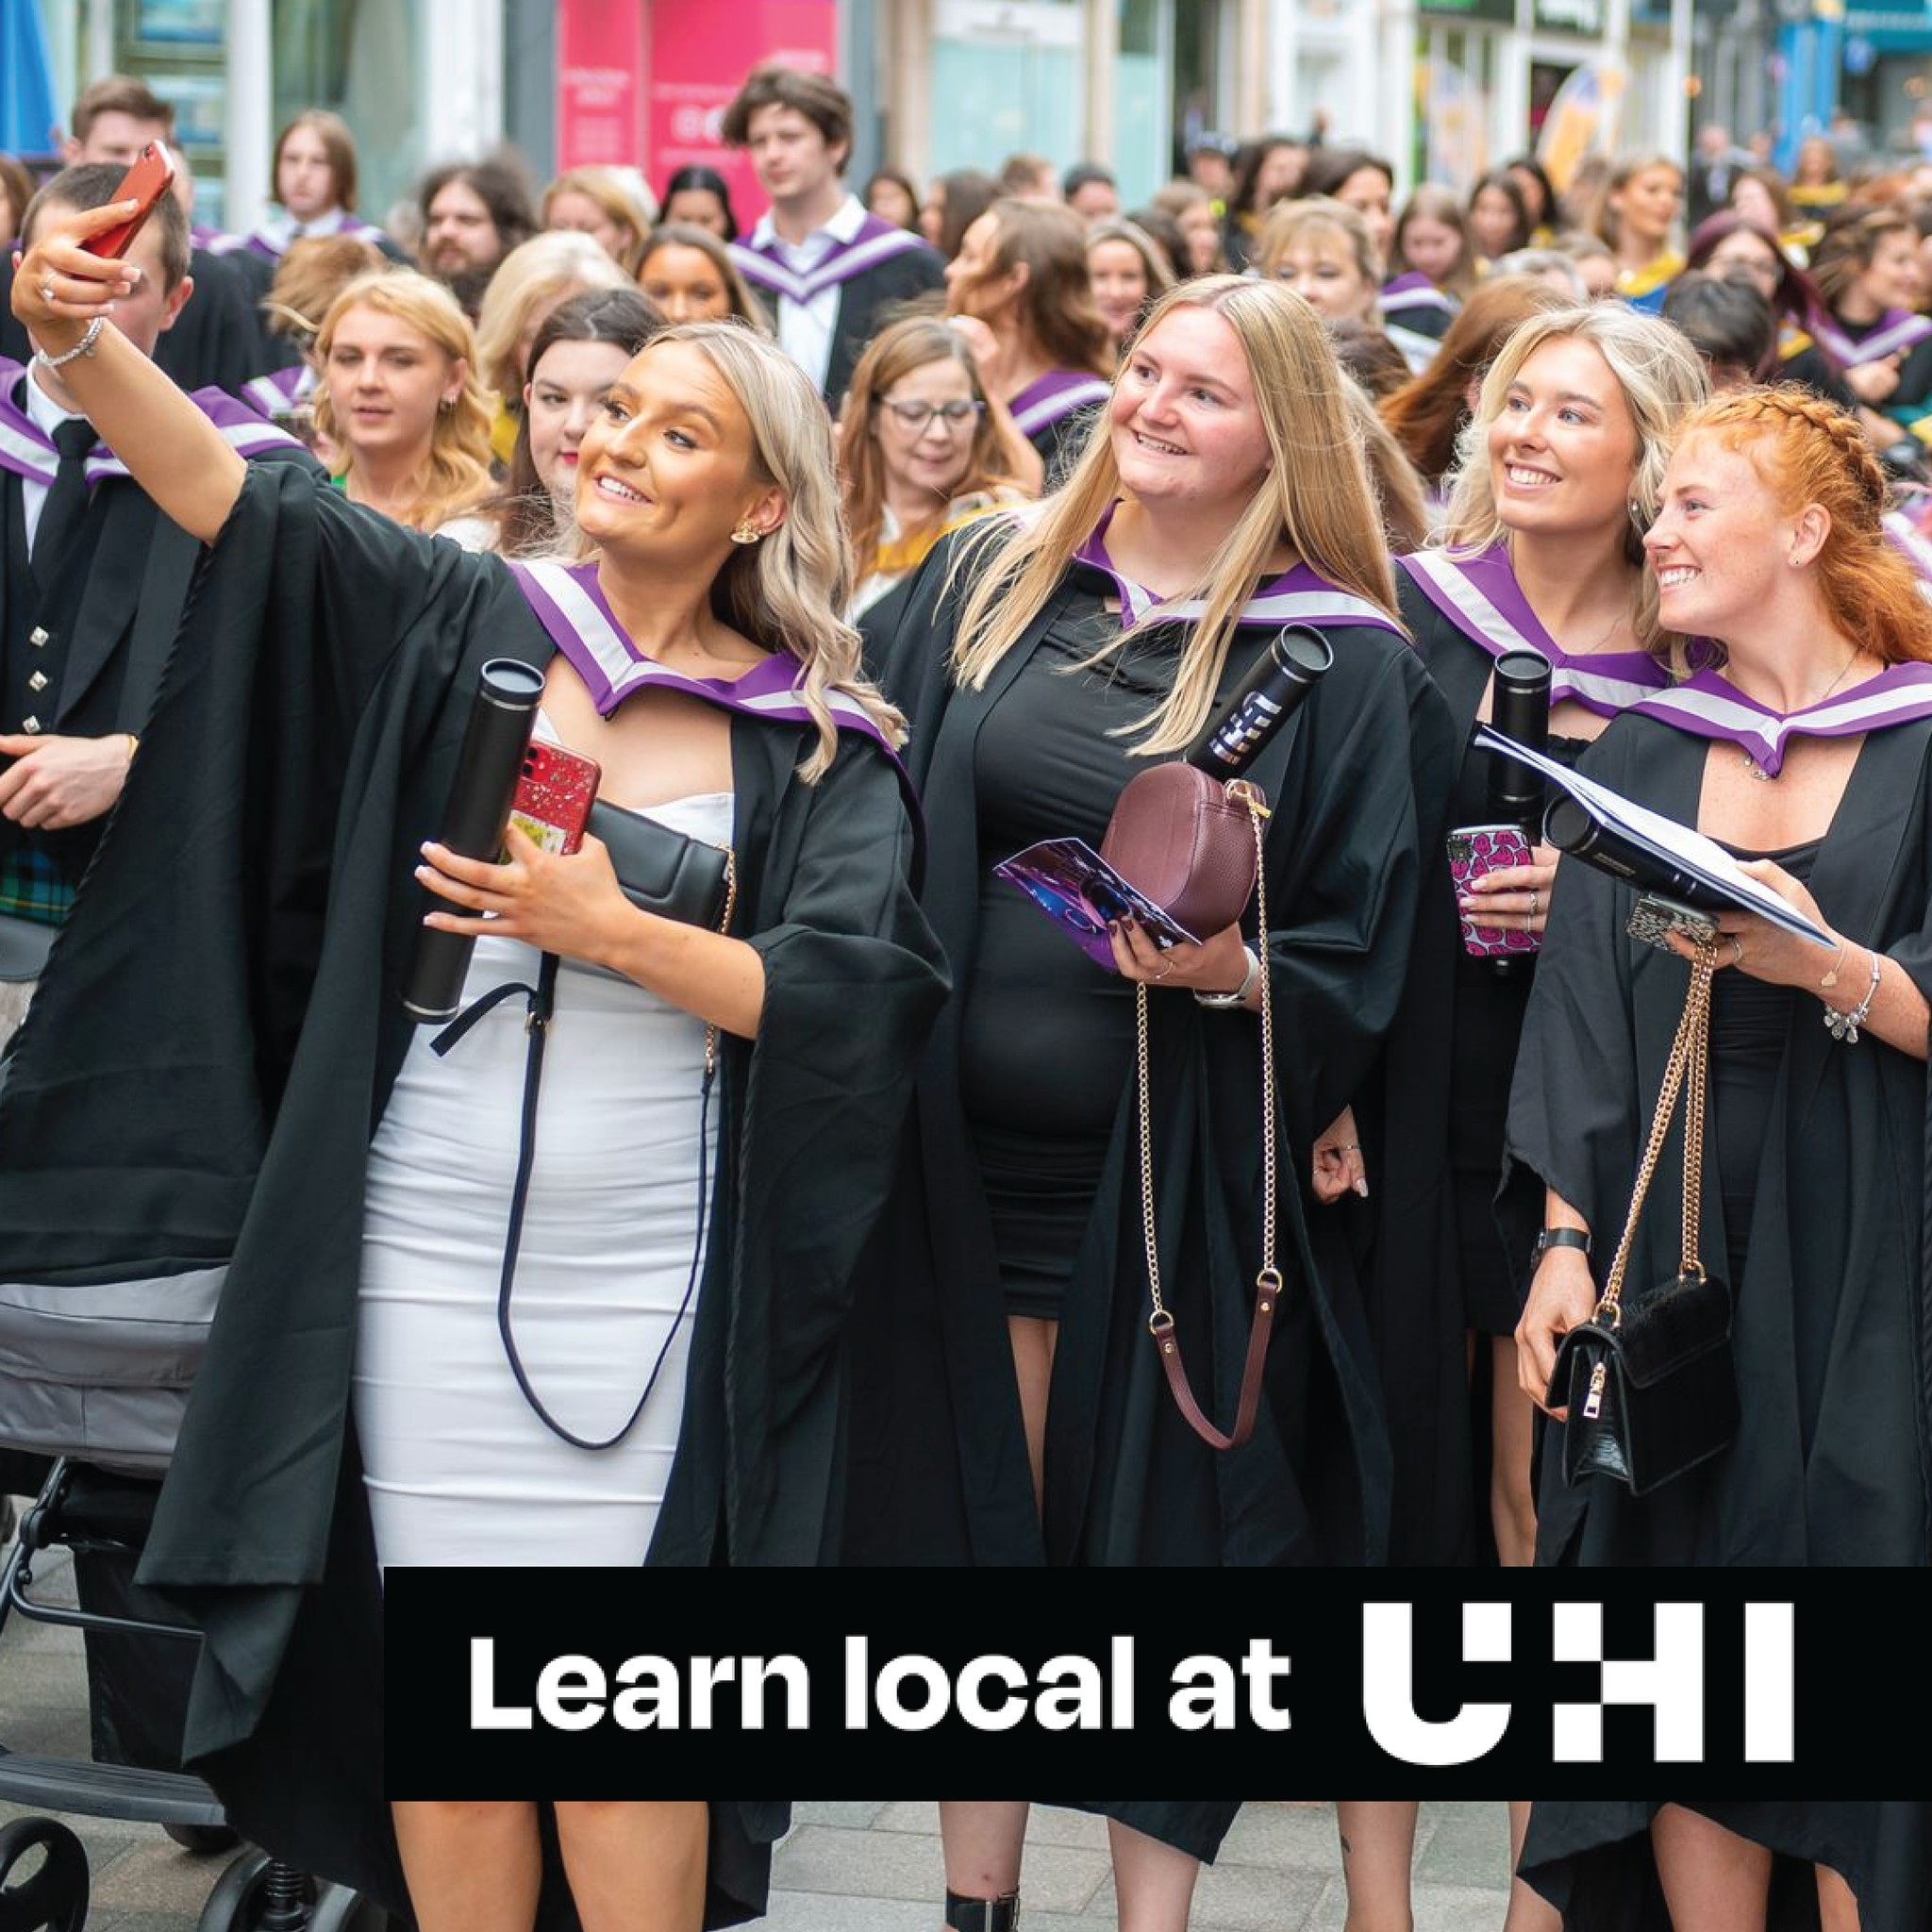 You don’t have to go far from home to benefit from further education